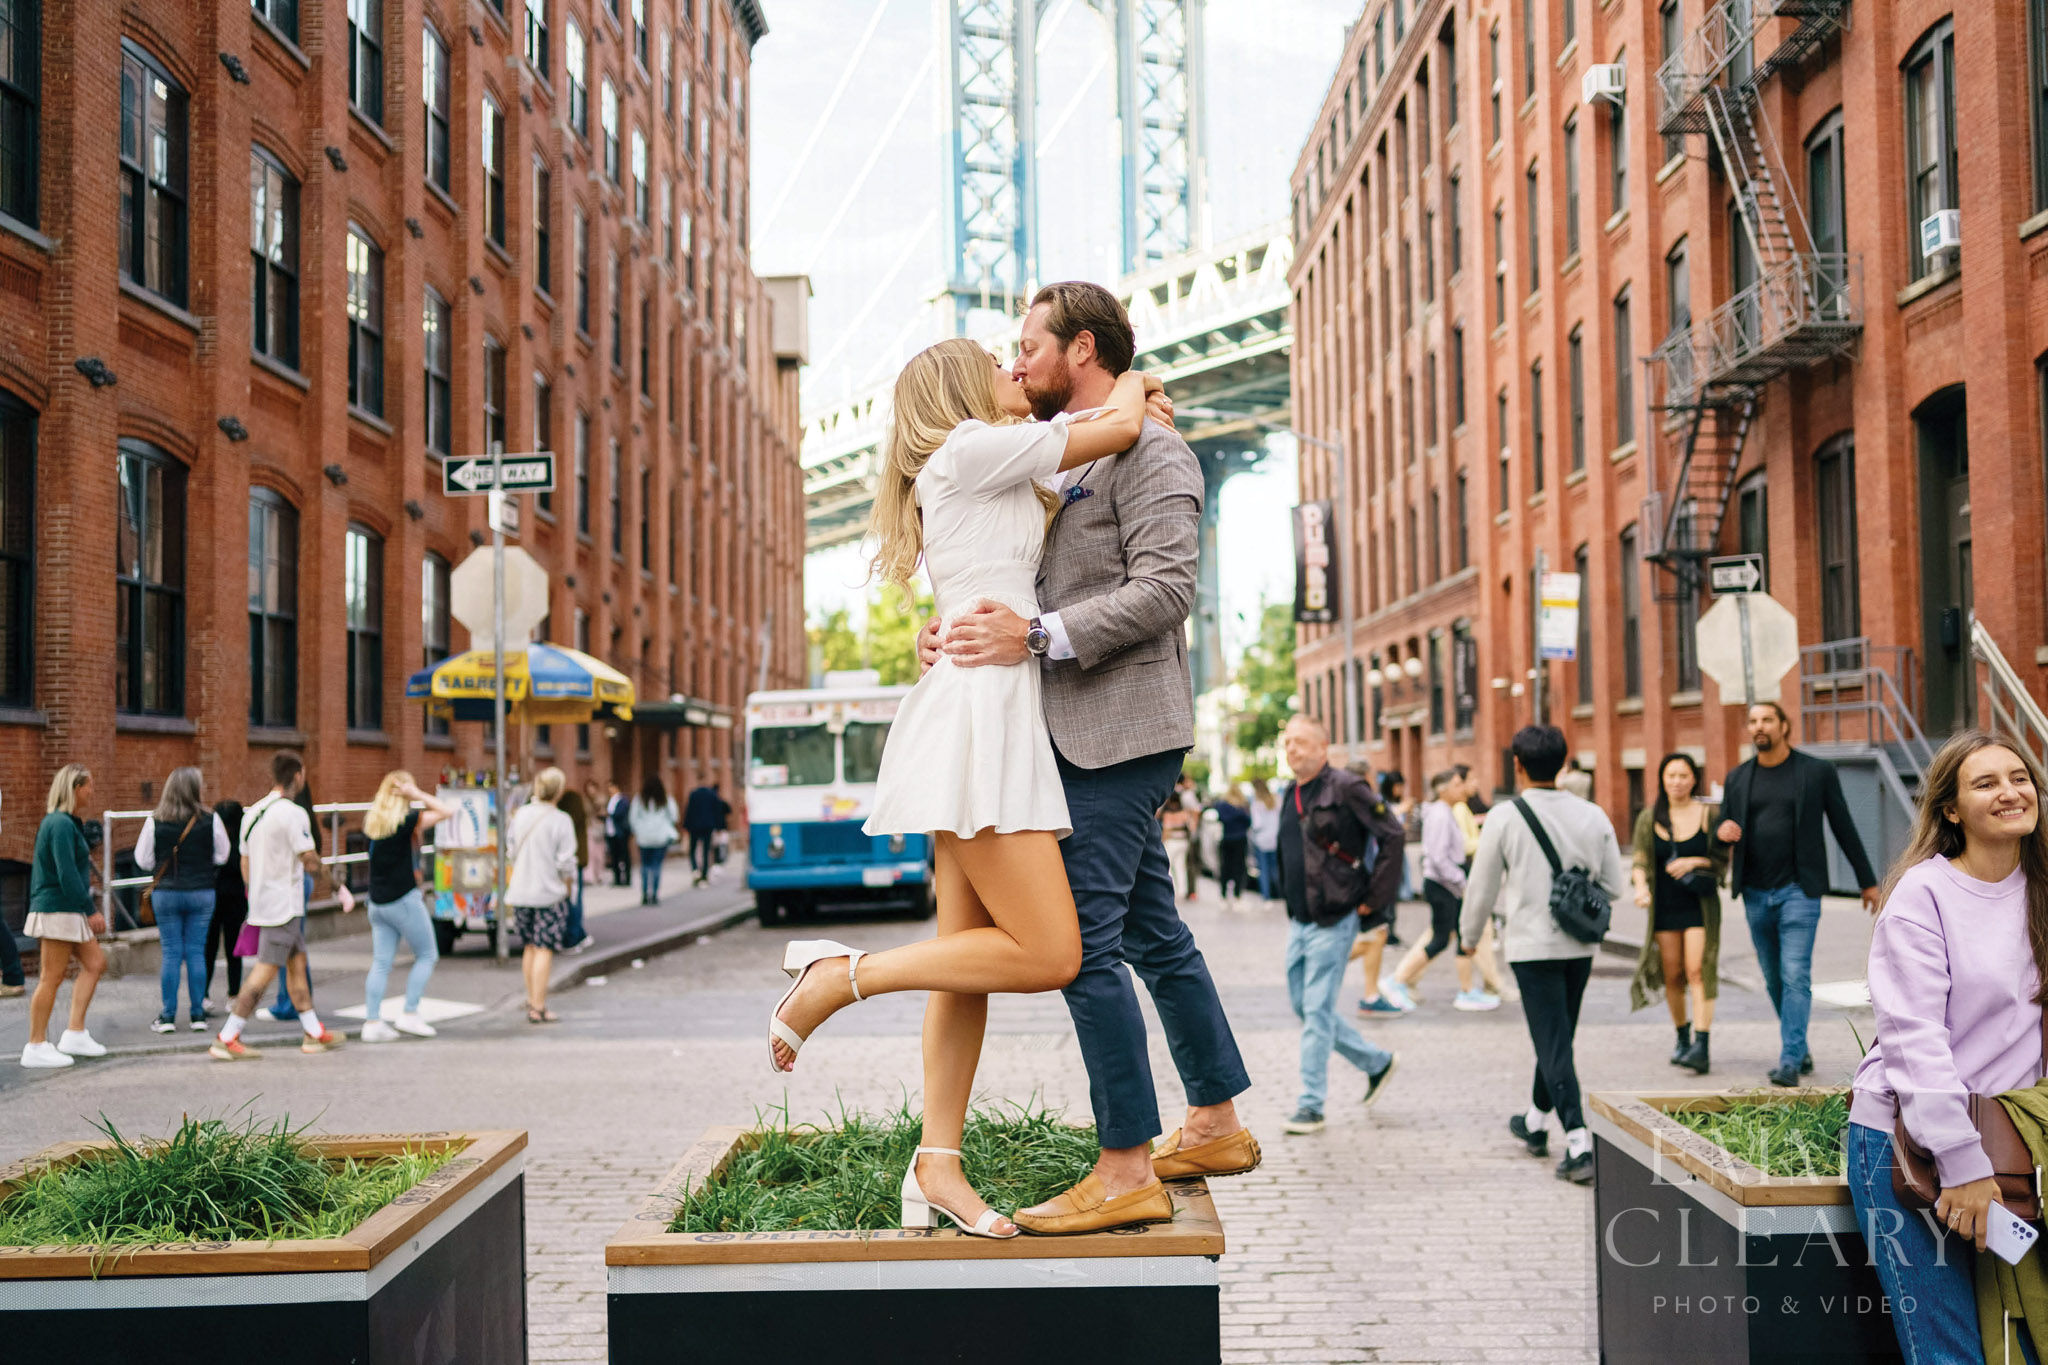 The couple's engagement kiss